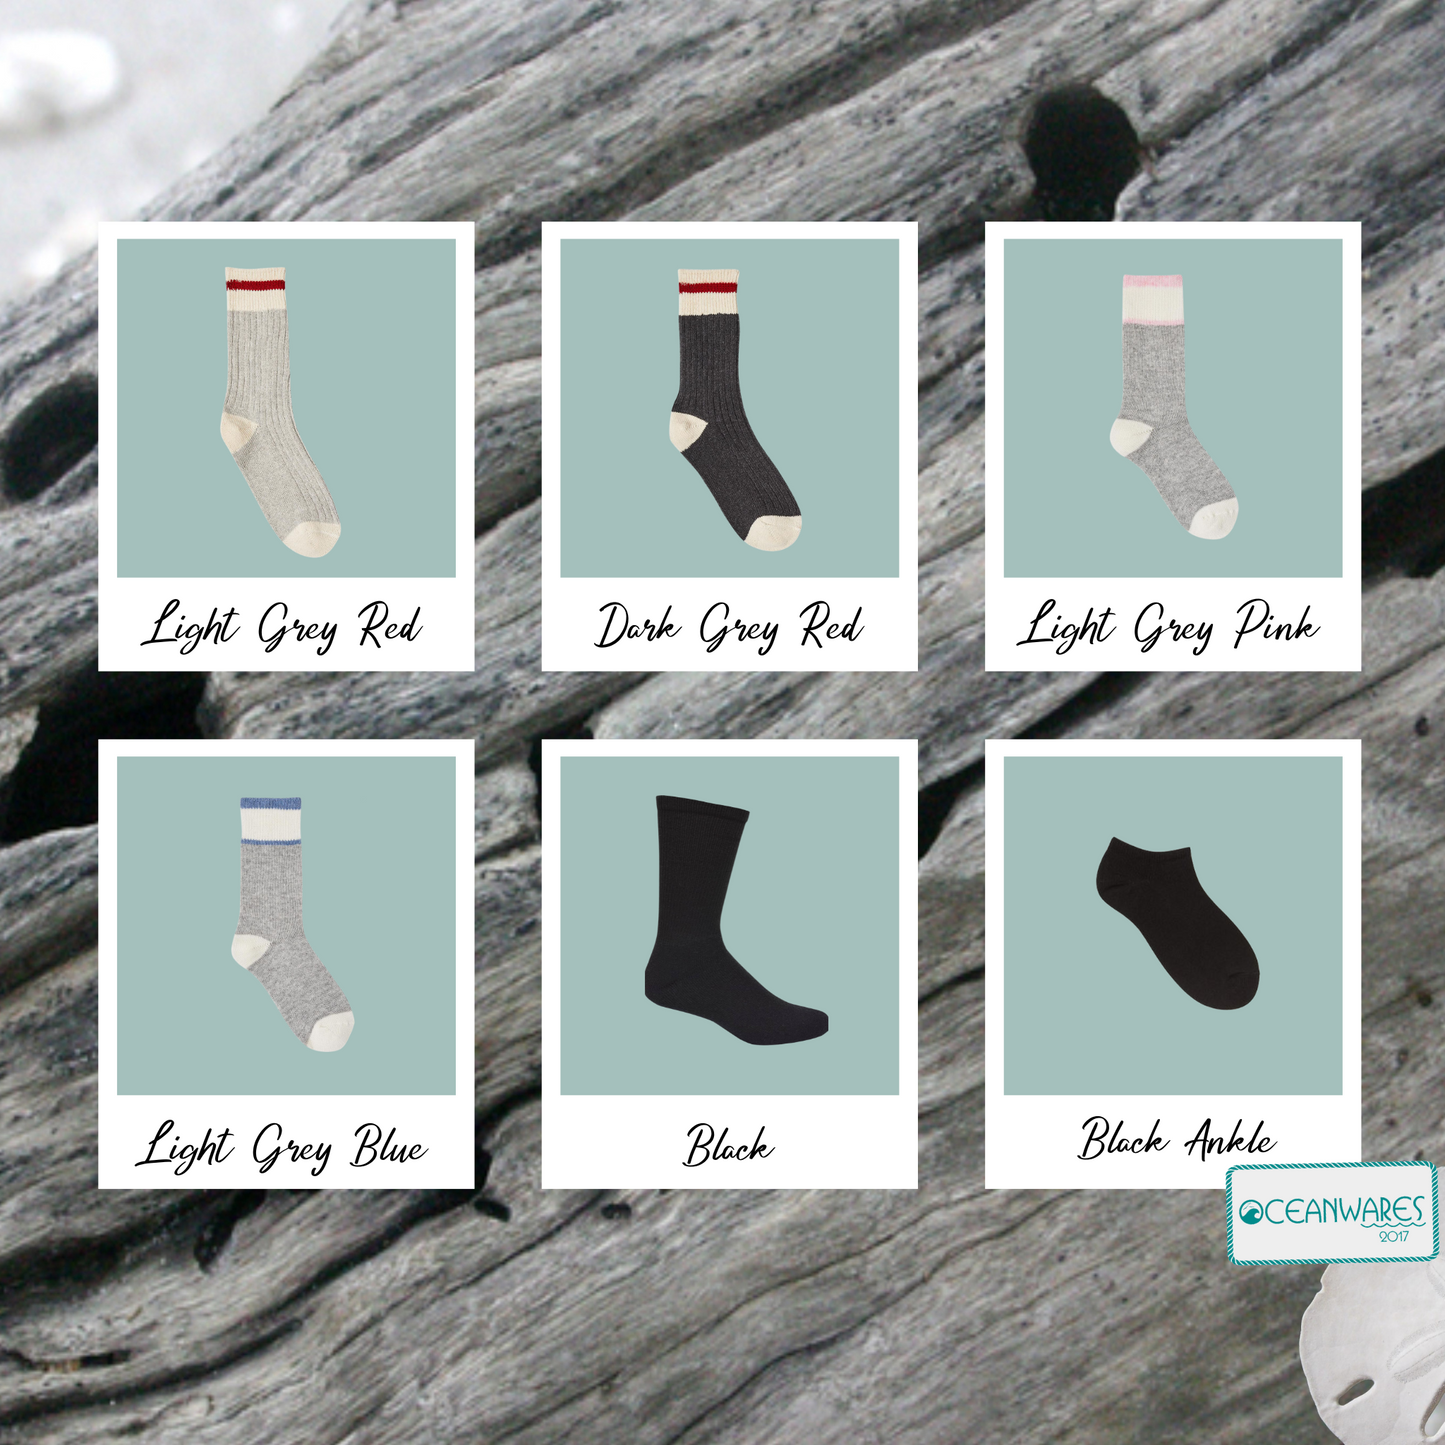 All This Hassle, for the Tassel, Grad gift, Graduation, SUPER SOFT NOVELTY WORD SOCKS.